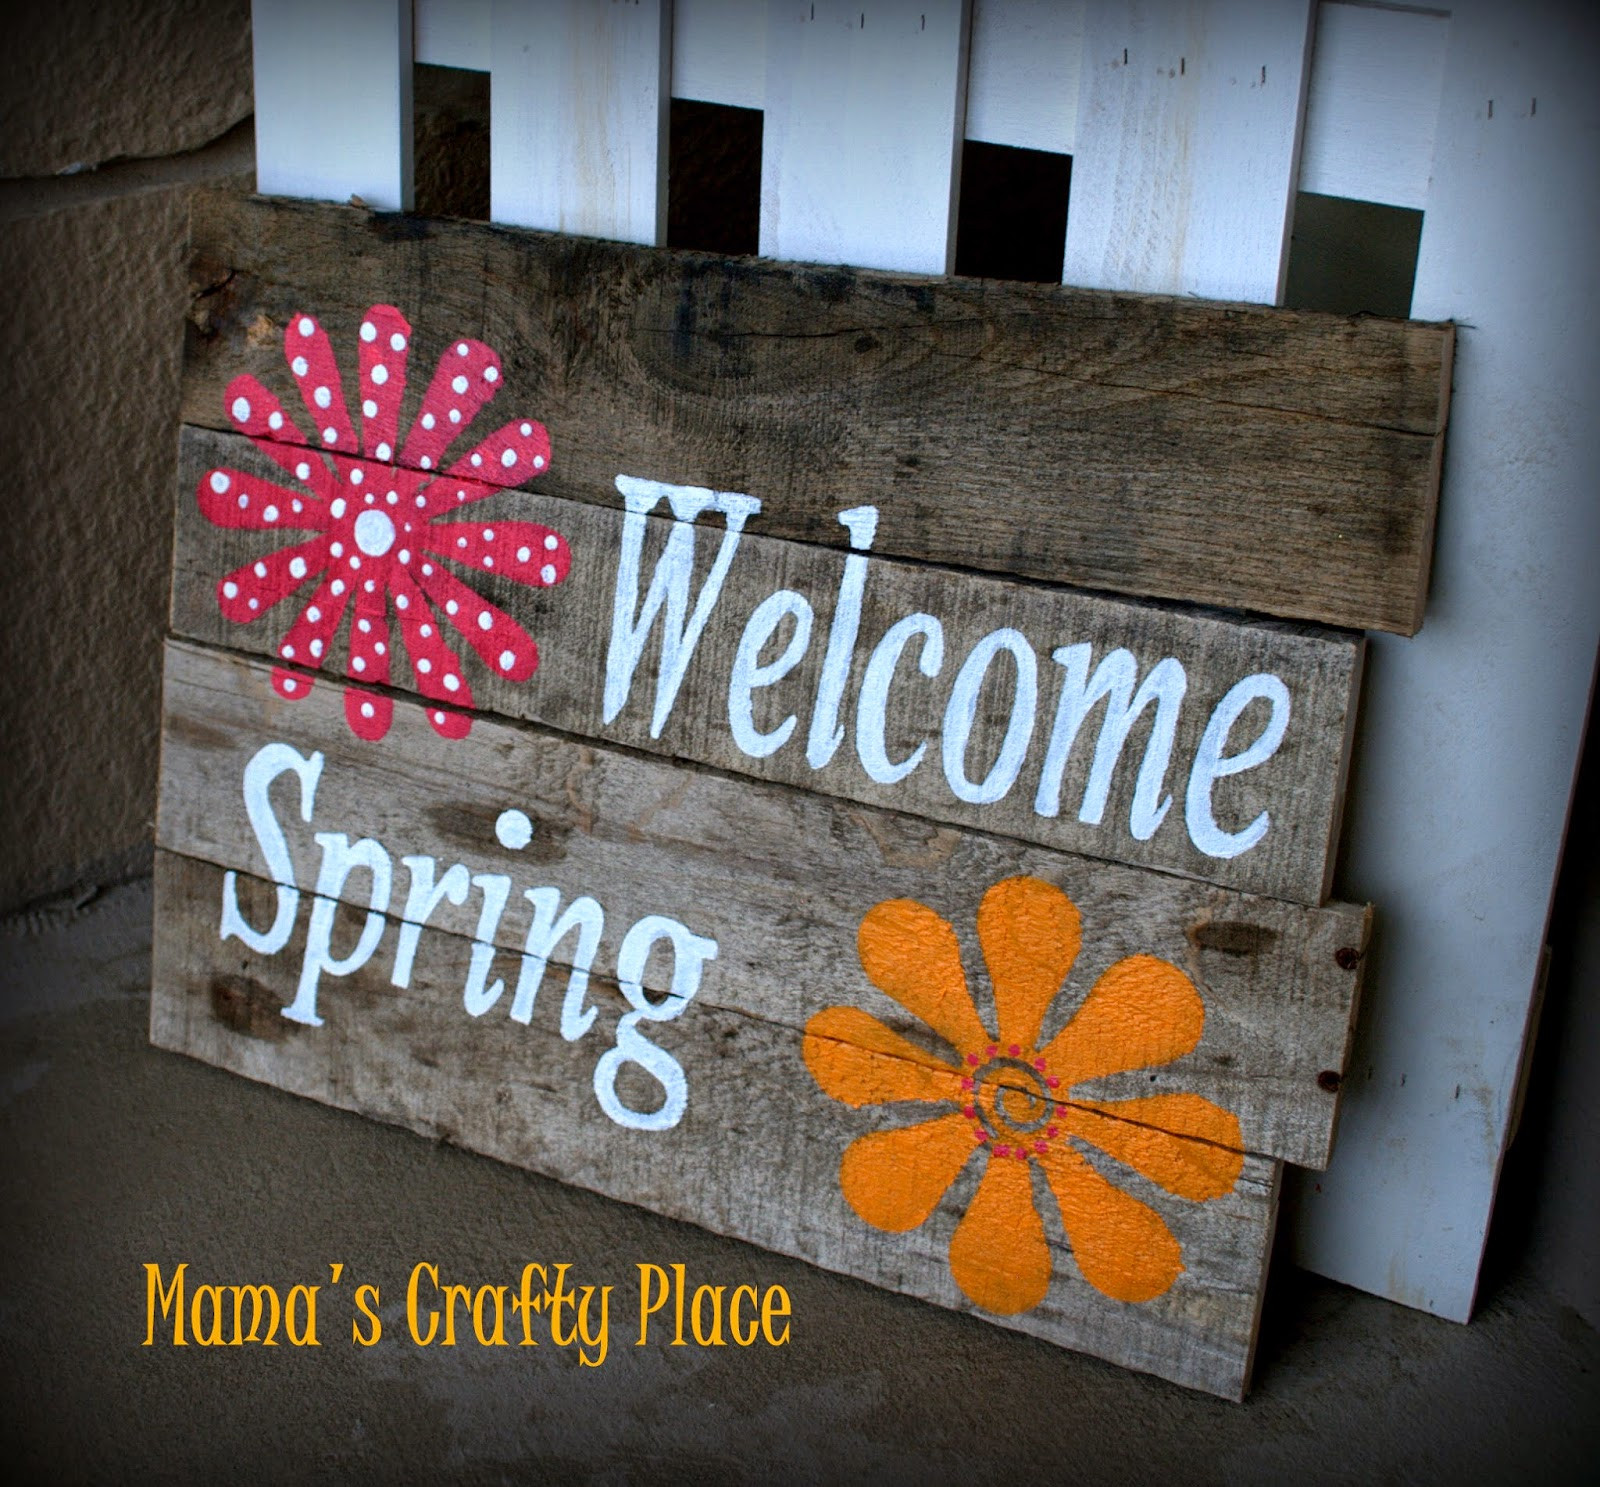 Wooden Sign Craft Ideas
 Mama s Crafts Old Board Wel e Spring Sign